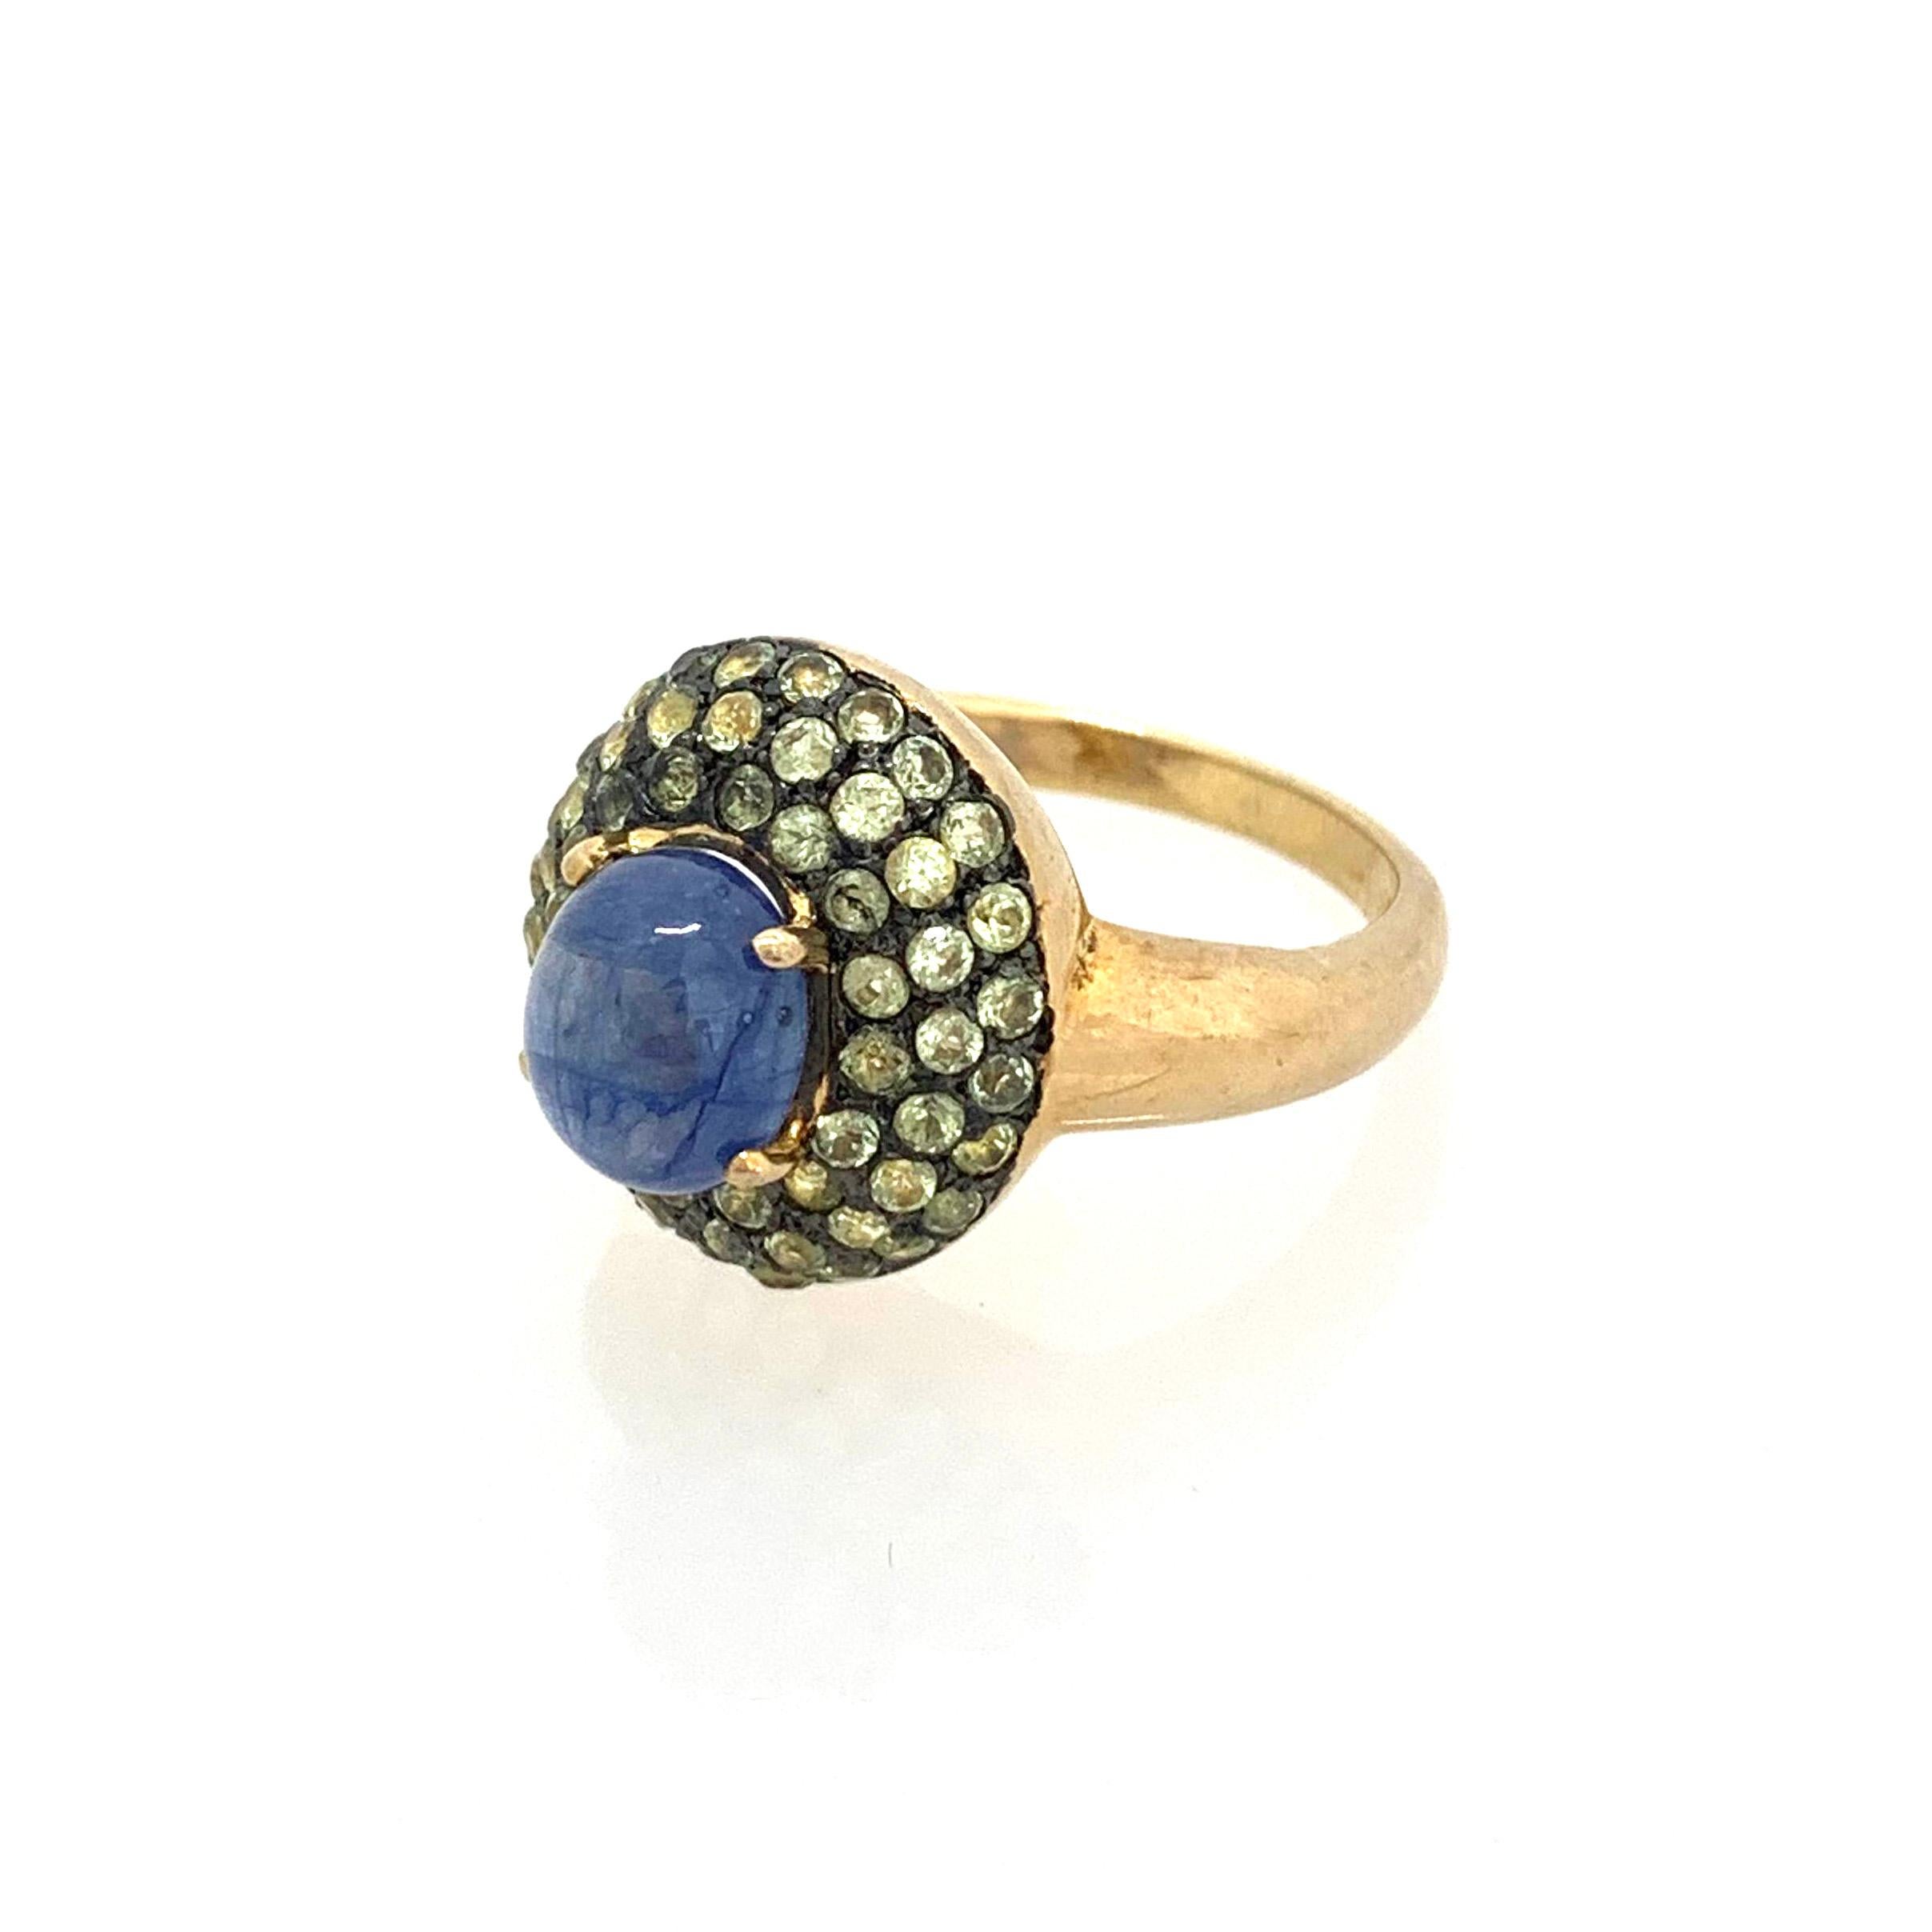 Antique-style Oval Sapphire and White Peridot Cocktail Ring

This fabulous ring features a 4ct oval cabochon-cut blue sapphire surrounded with 51pcs of round peridot, handset in two-tone 18k gold vermeil and black rhodium gilded over sterling